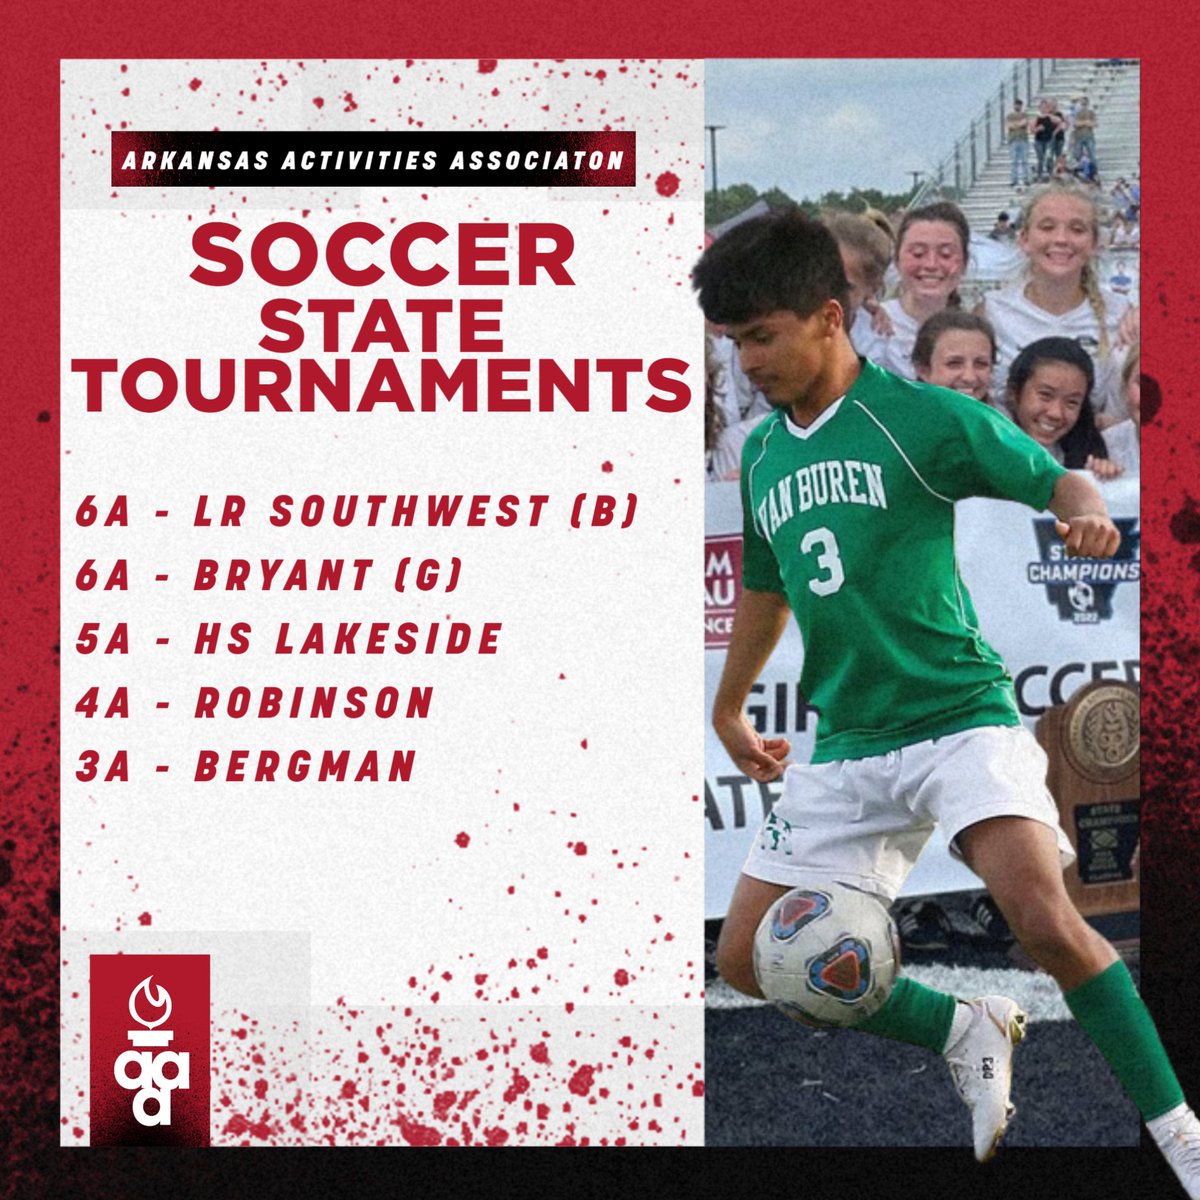 We are less than 24 hours away from the state tournaments getting underway! Get out and support your favorite team and root them on as the path to a championship continues! Tickets: gofan.co/app/school/AAA